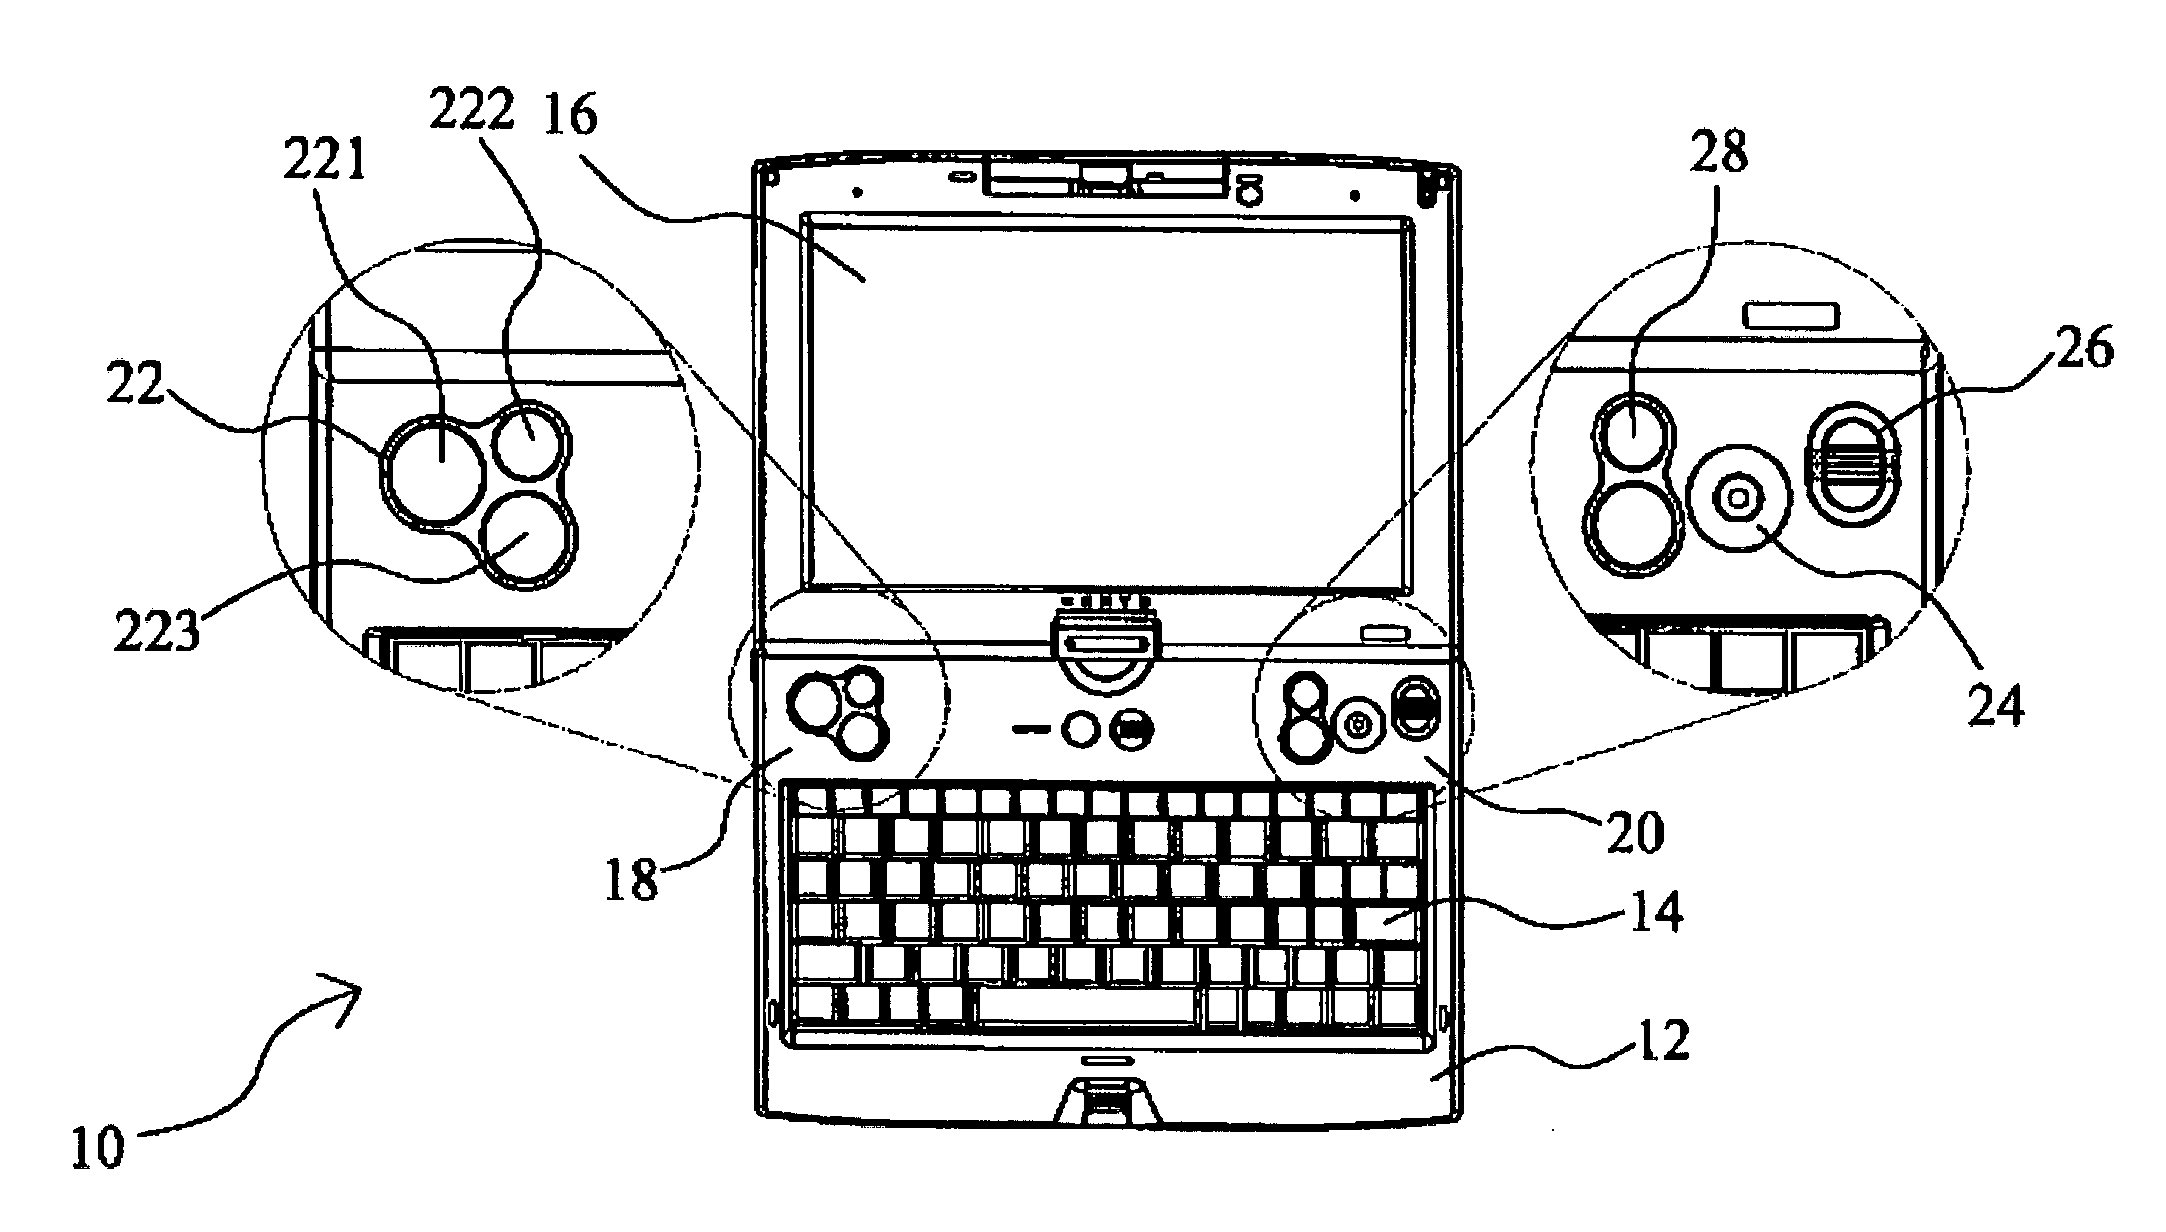 Portable apparatus with thumb control interface